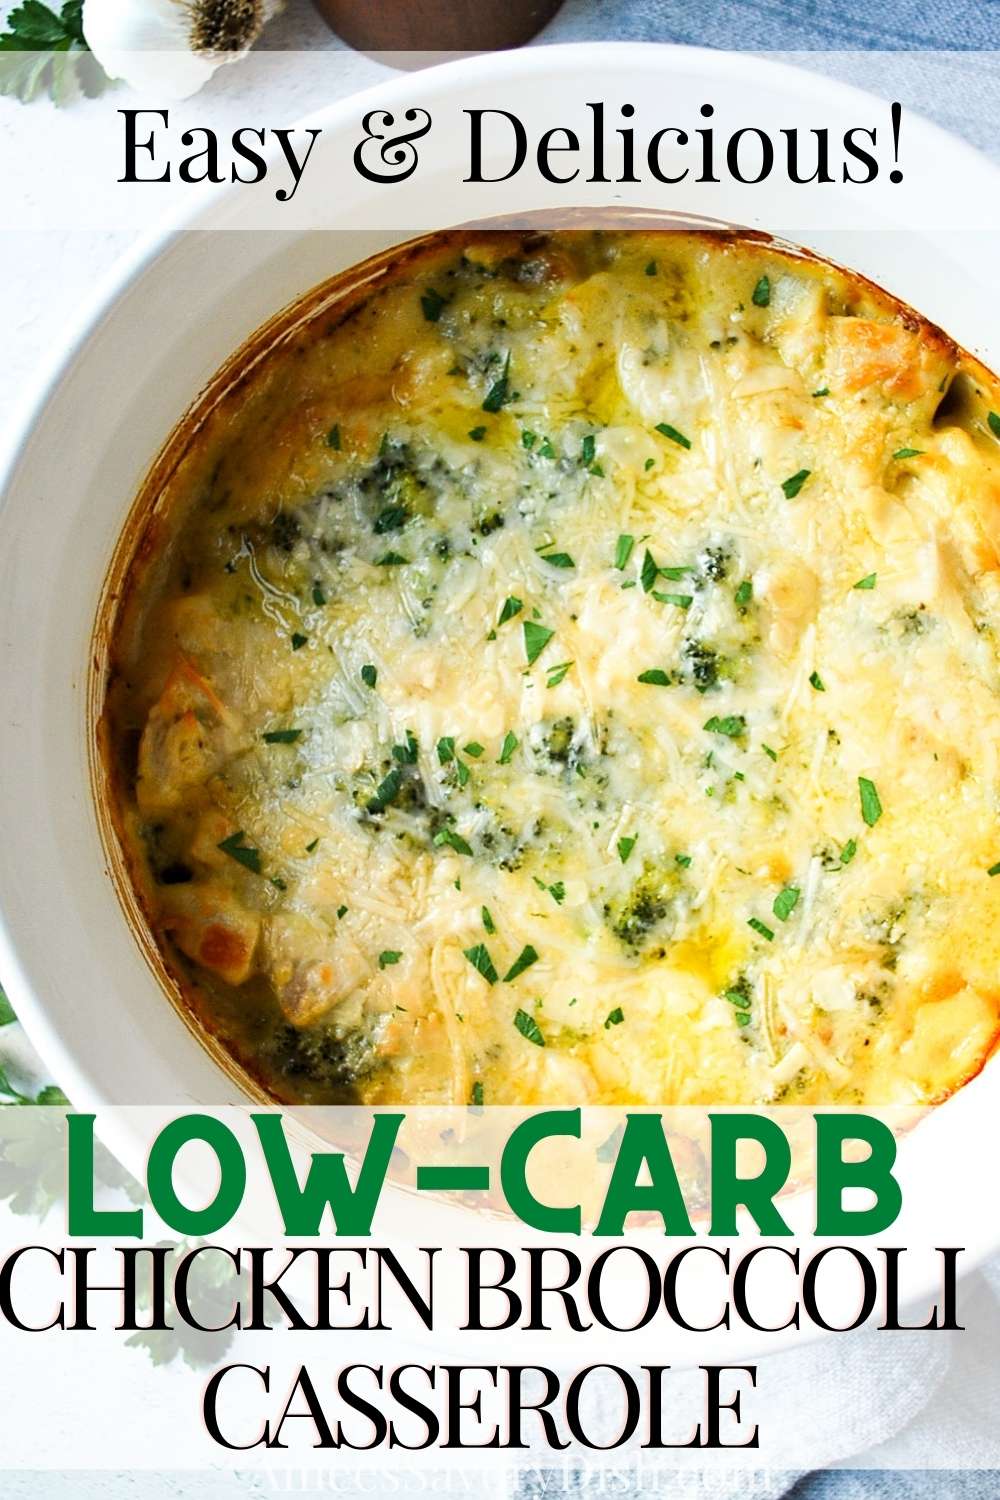 Low Carb Chicken Broccoli Casserole! Tender chicken breasts and broccoli are baked in a rich cheesy cream sauce to make an easy keto-friendly weeknight dinner the whole family will love! via @Ameessavorydish